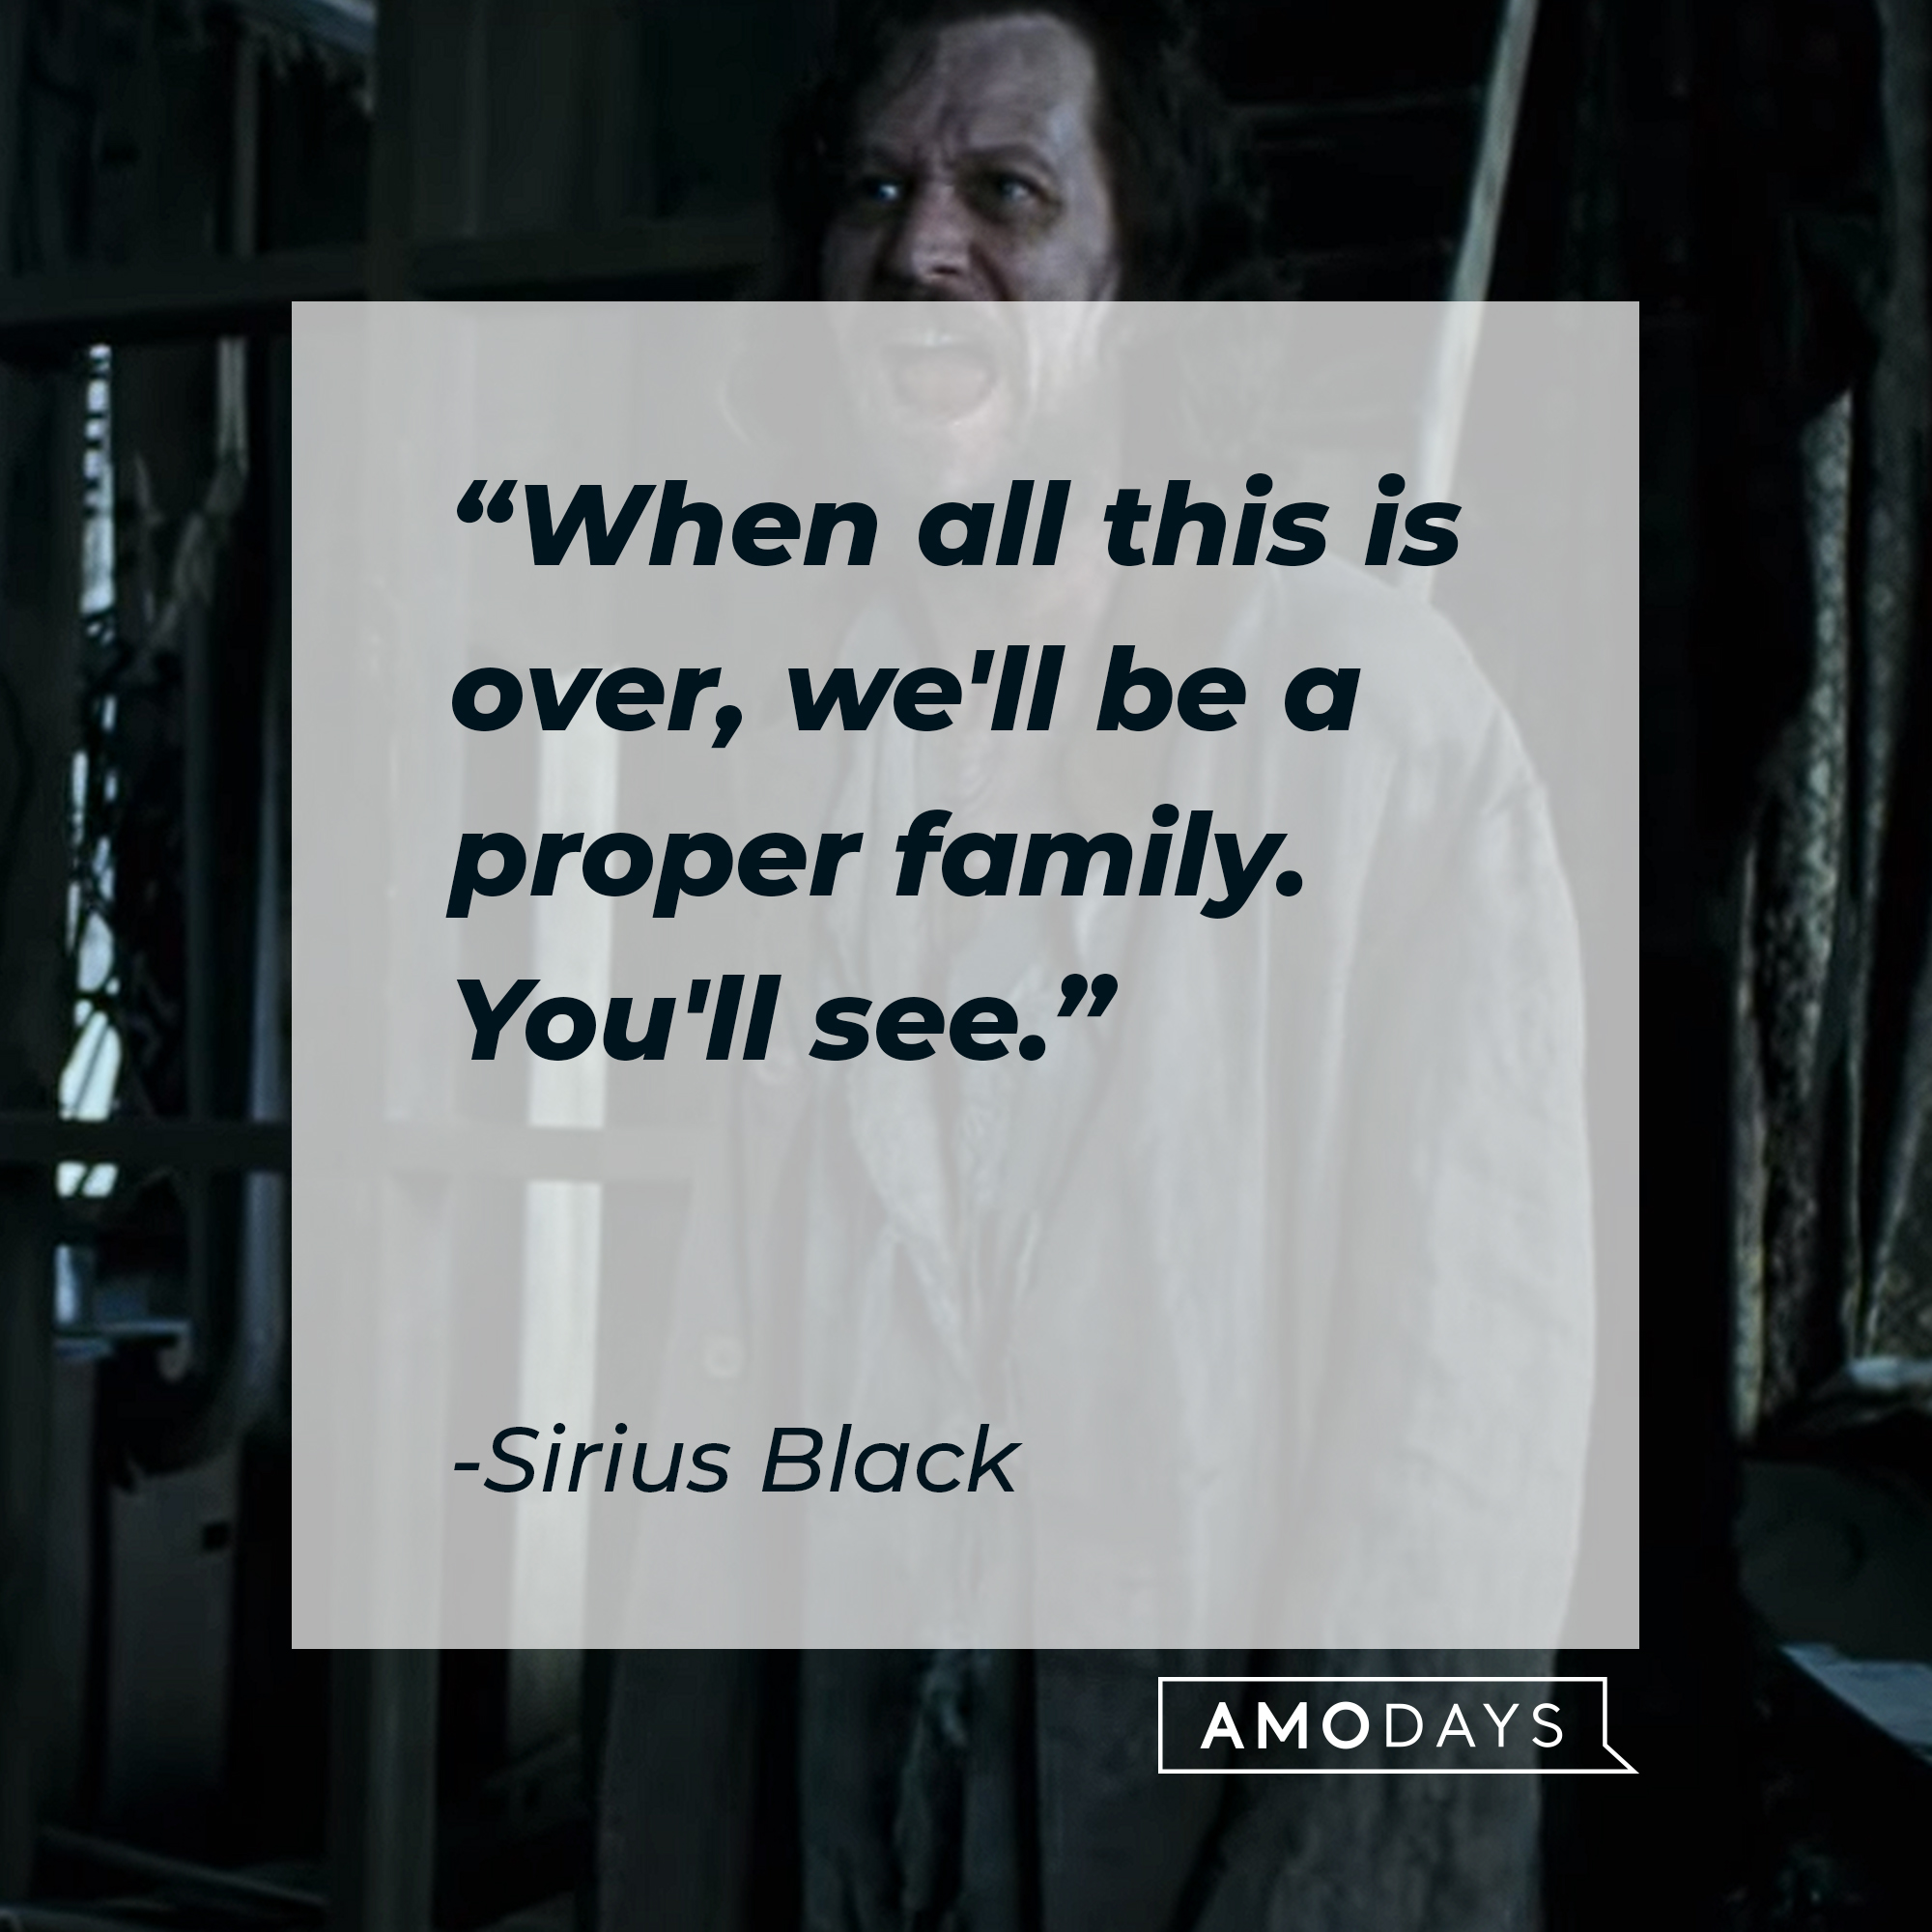 Sirius Black's quote: "When all this is over, we'll be a proper family. You'll see." | Source: YouTube/harrypotter